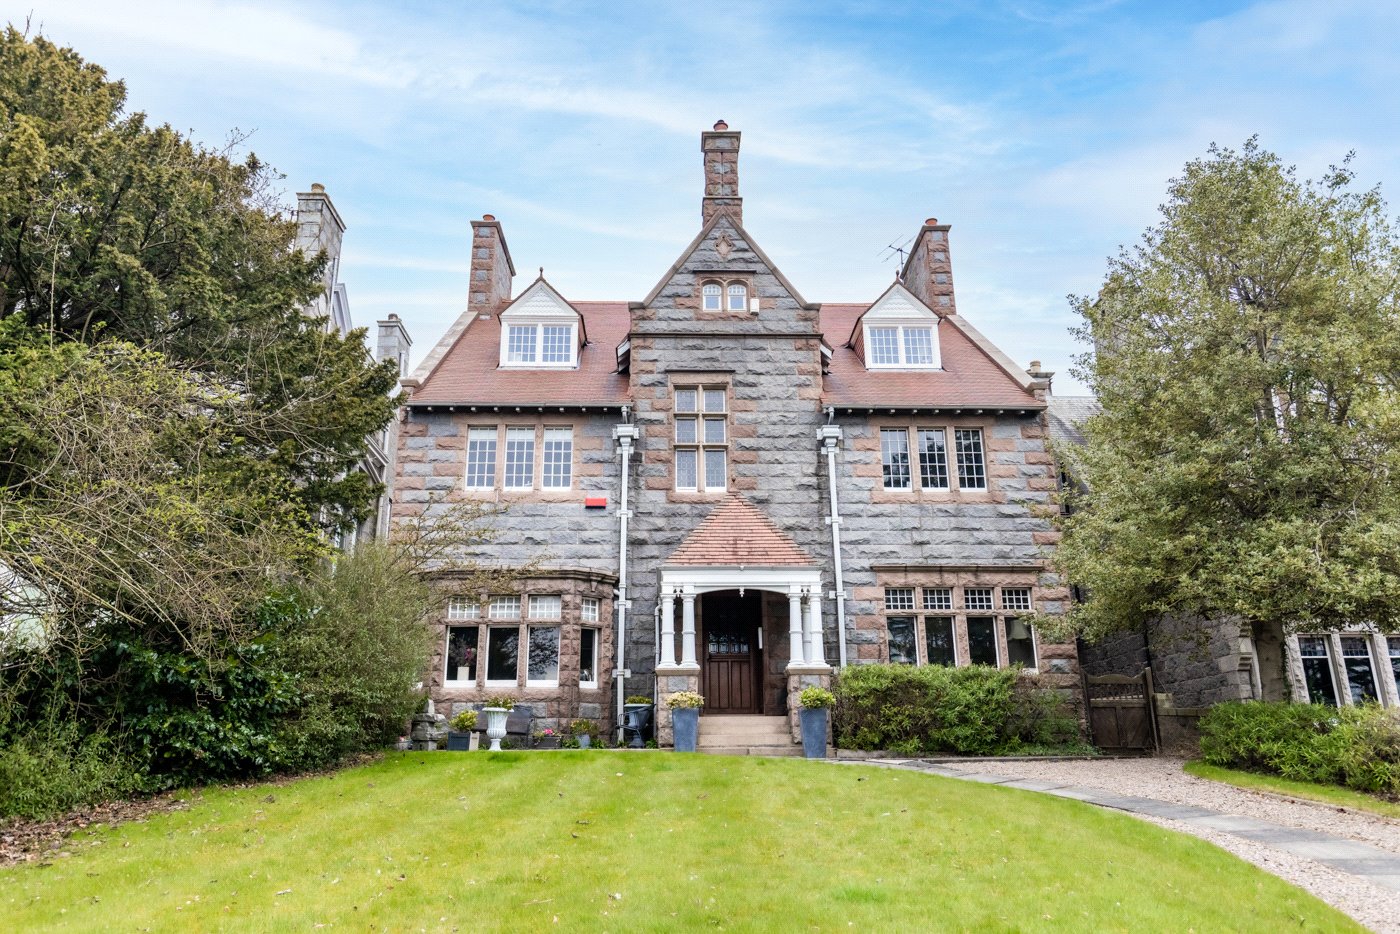 Our latest properties for sale or to let (20th April 2022)